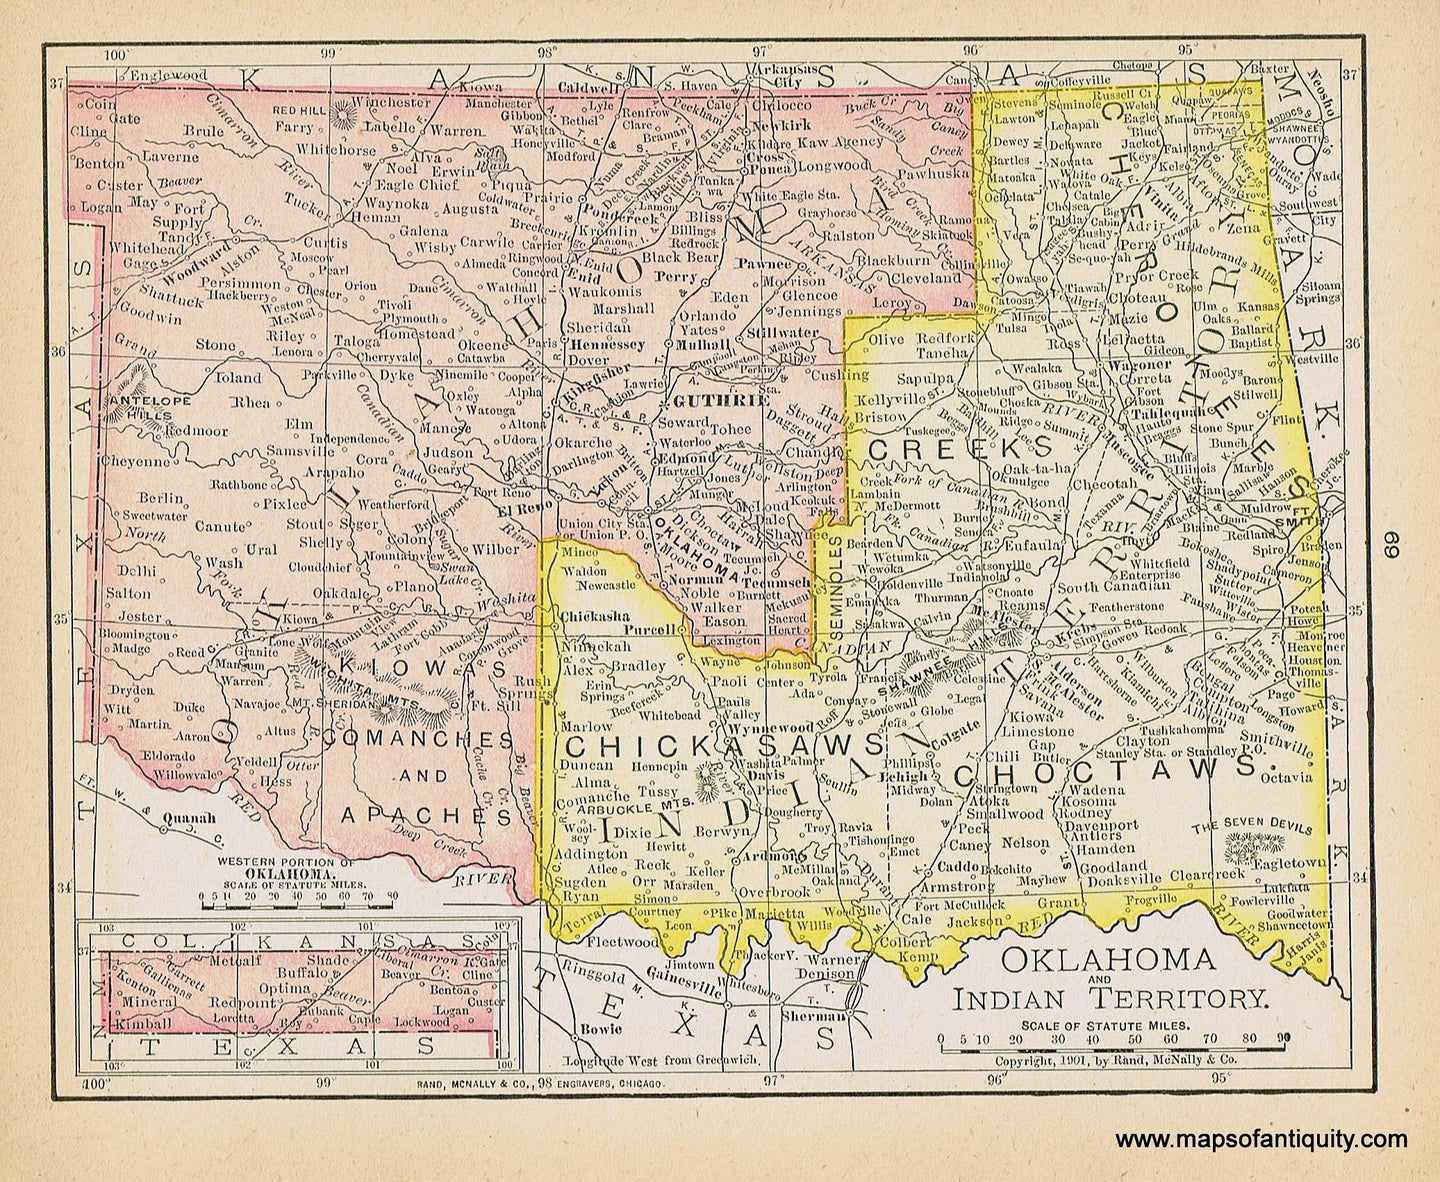 Genuine-Antique-Map-Oklahoma-and-Indian-Territory-1900-Rand-McNally-Maps-Of-Antiquity